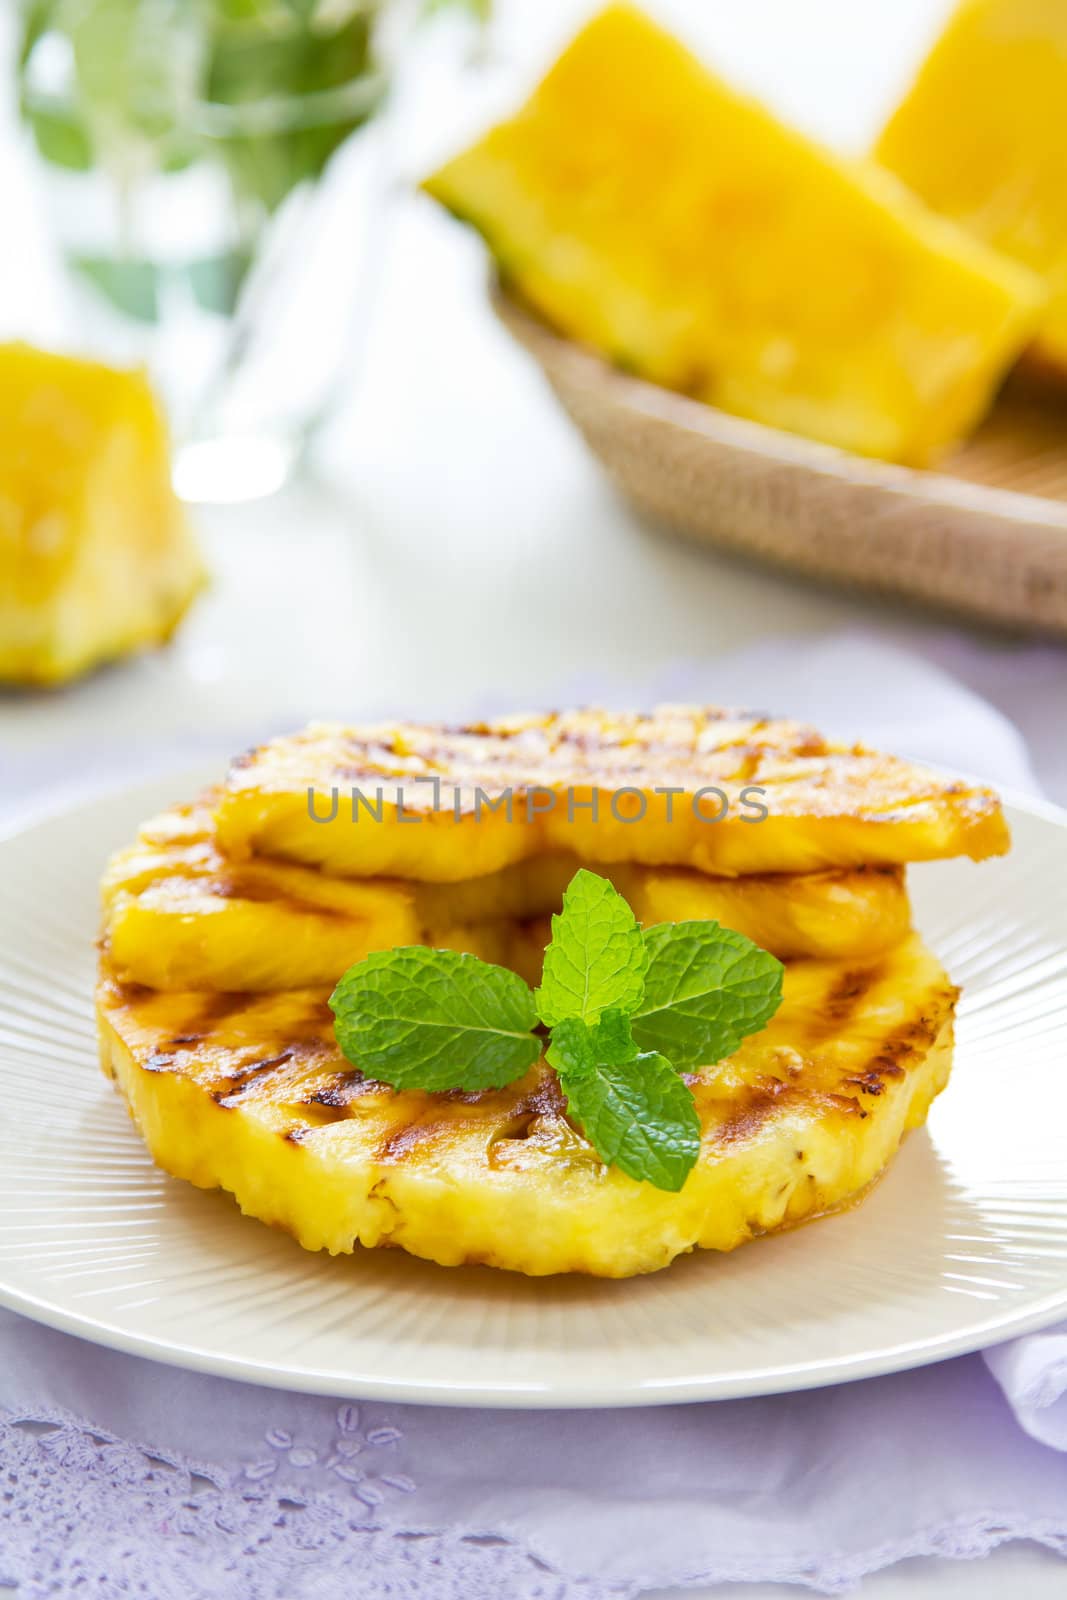 Grilled Pineapple with mint